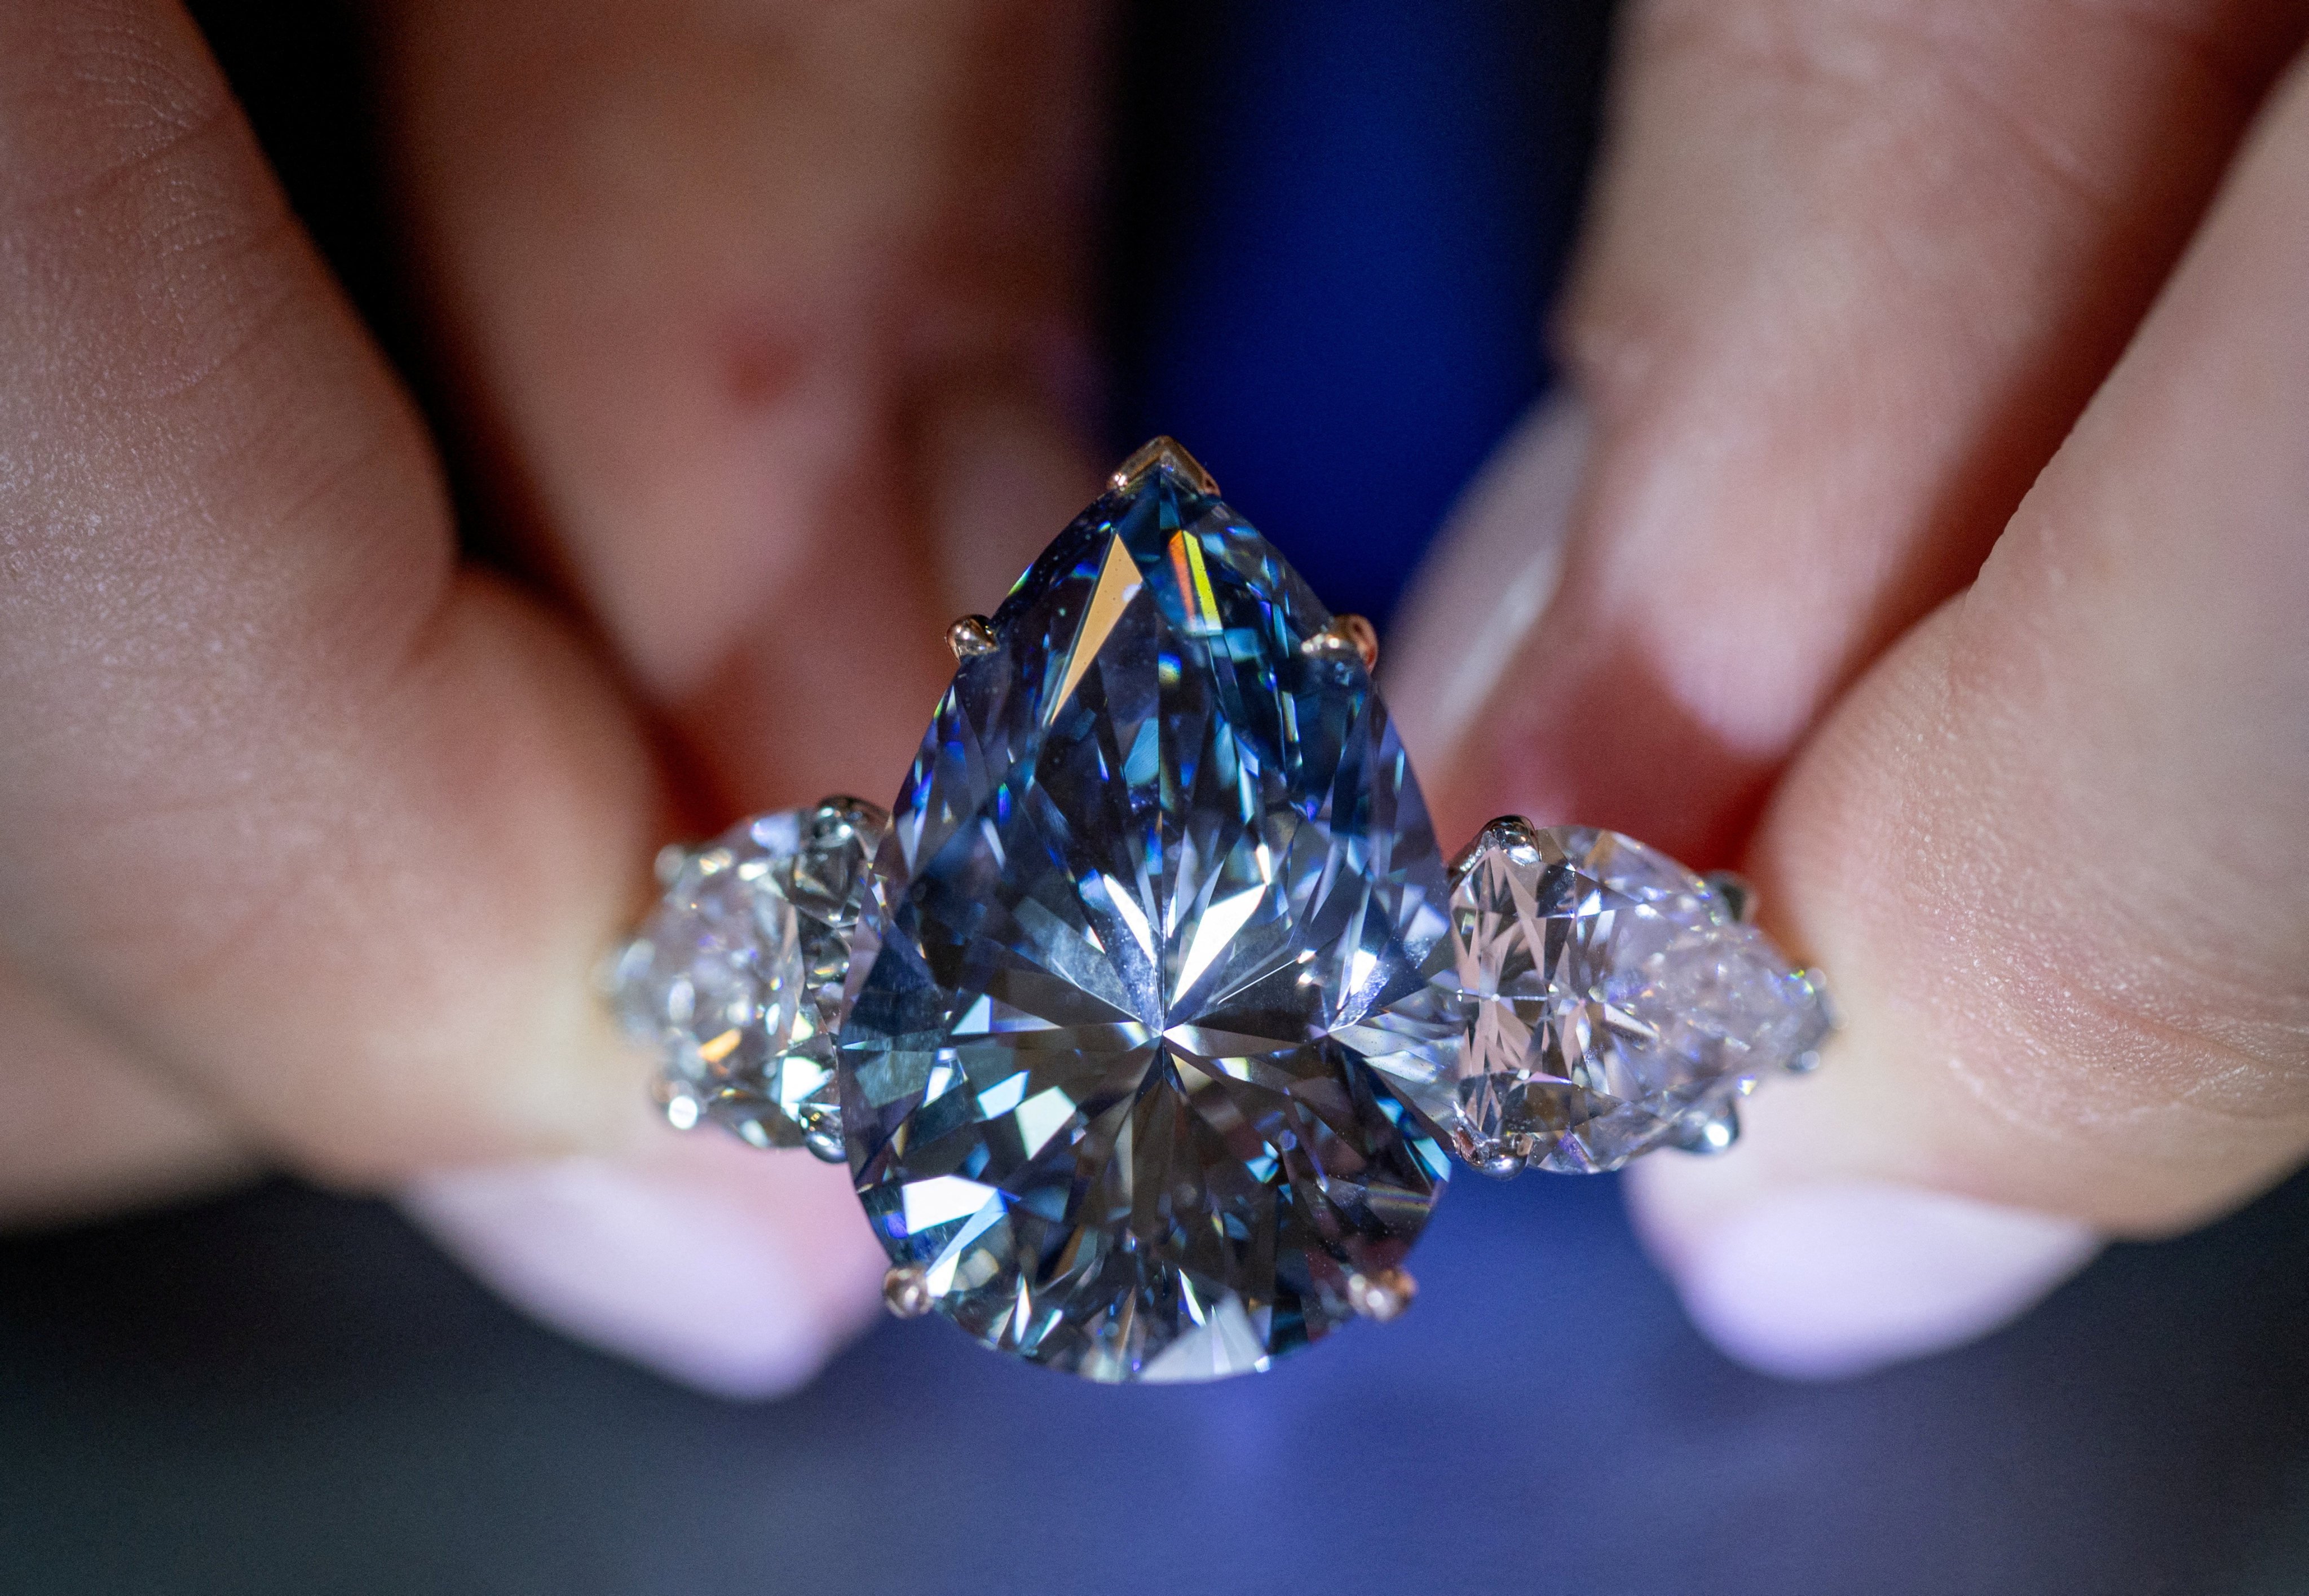 LVMH catches the eye with high-end lab-created diamonds